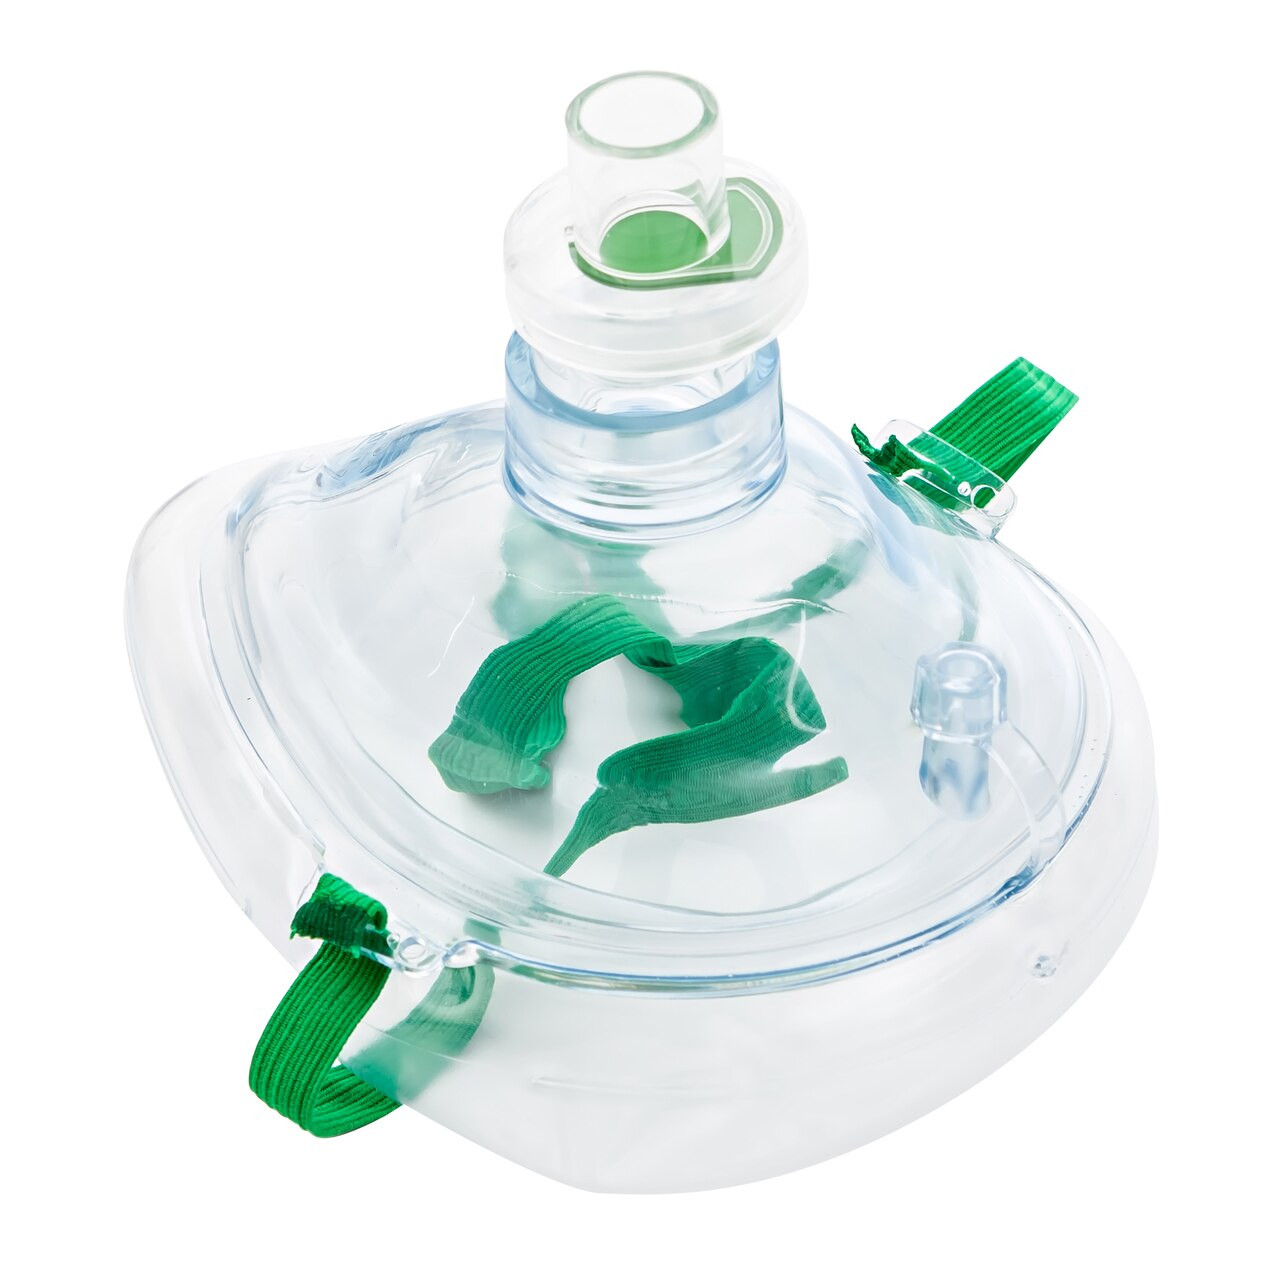 Ambu CPR Mask with Oxygen Inlet in Hard Case